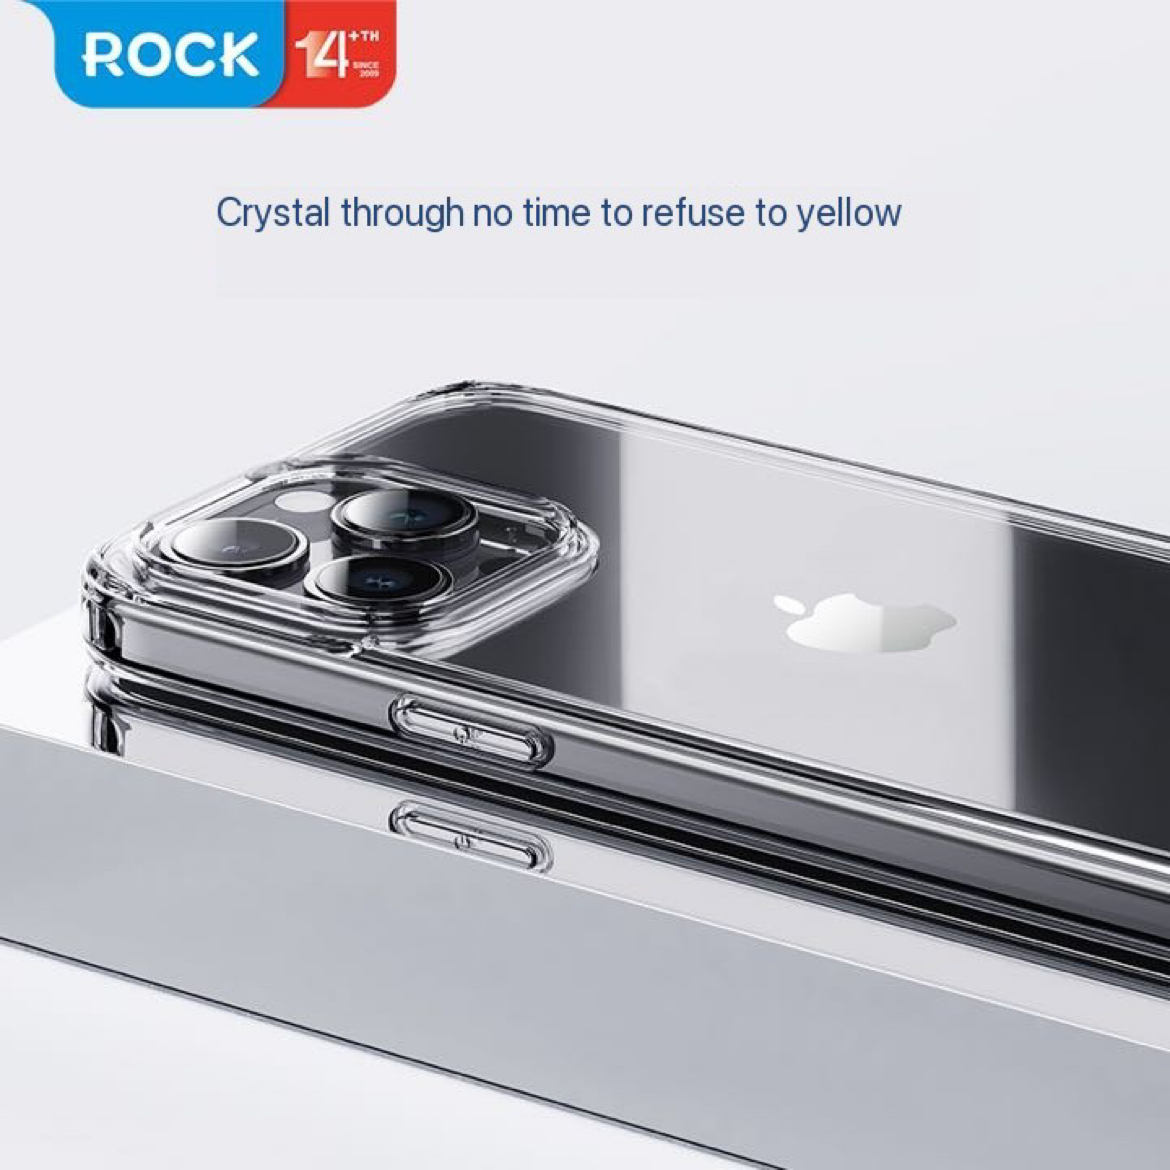 Rock Space Clear transparent skal till iPhone 15 Pro Max